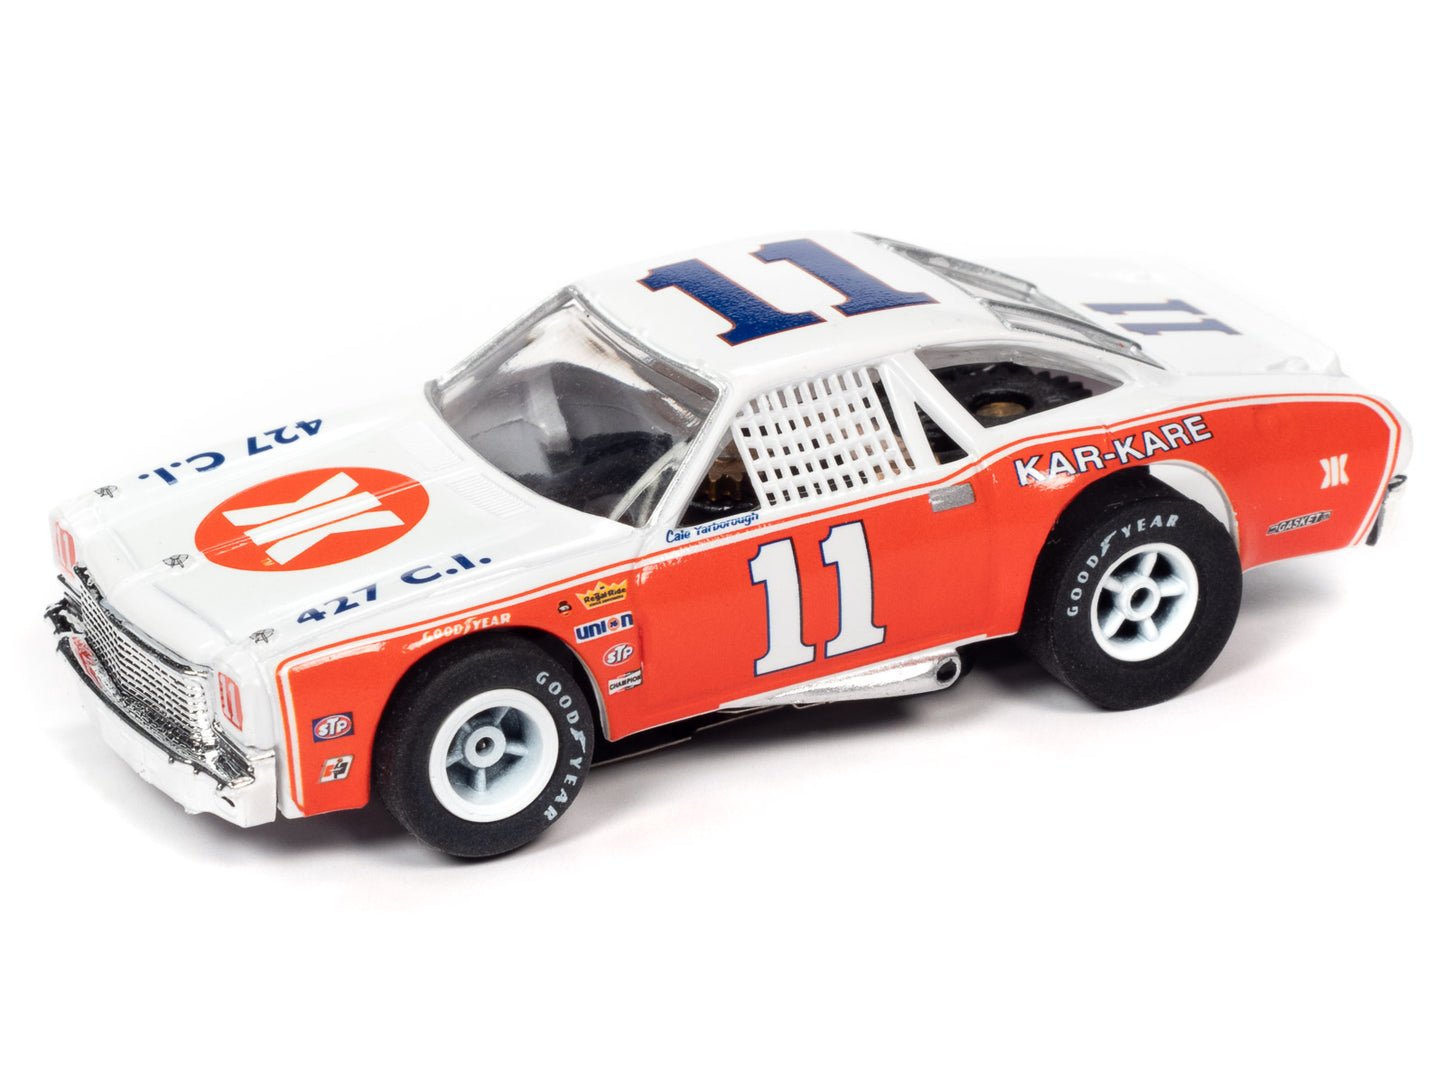 - Stock Car Legends - X-Traction - Release 31 | SC355 | X-Traction